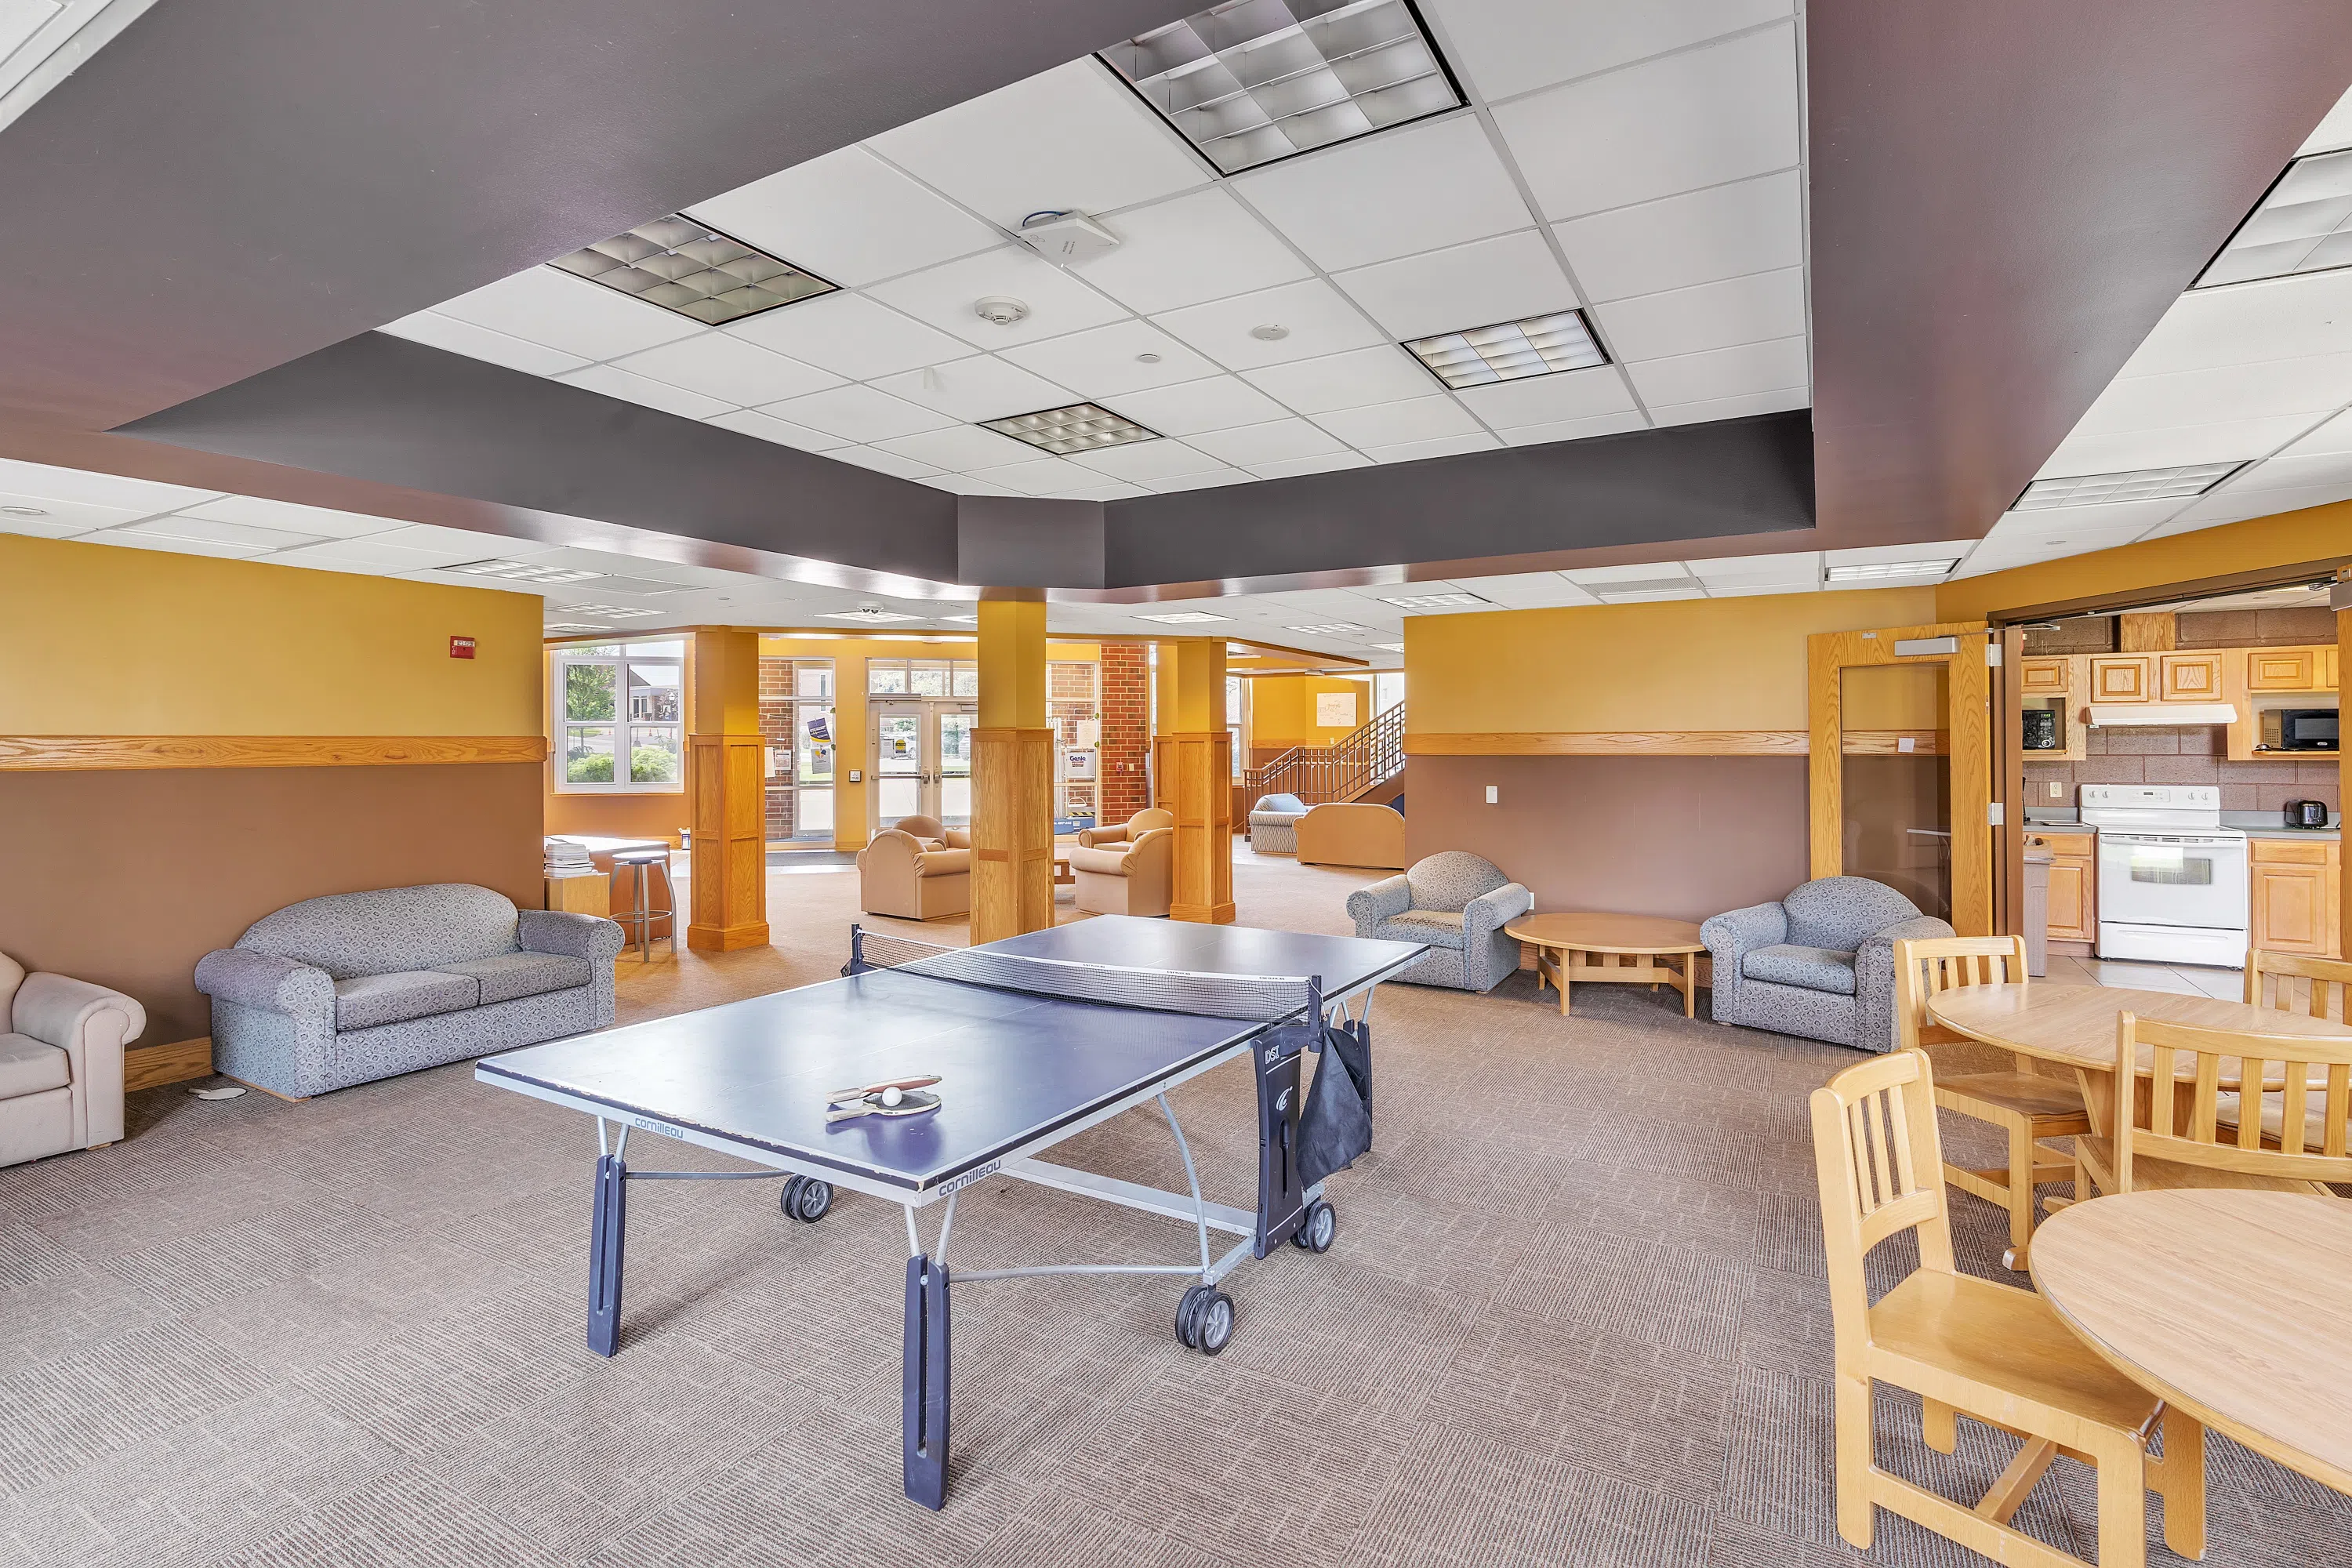 Community and lounge space with ping pong table in Gainey Hall.